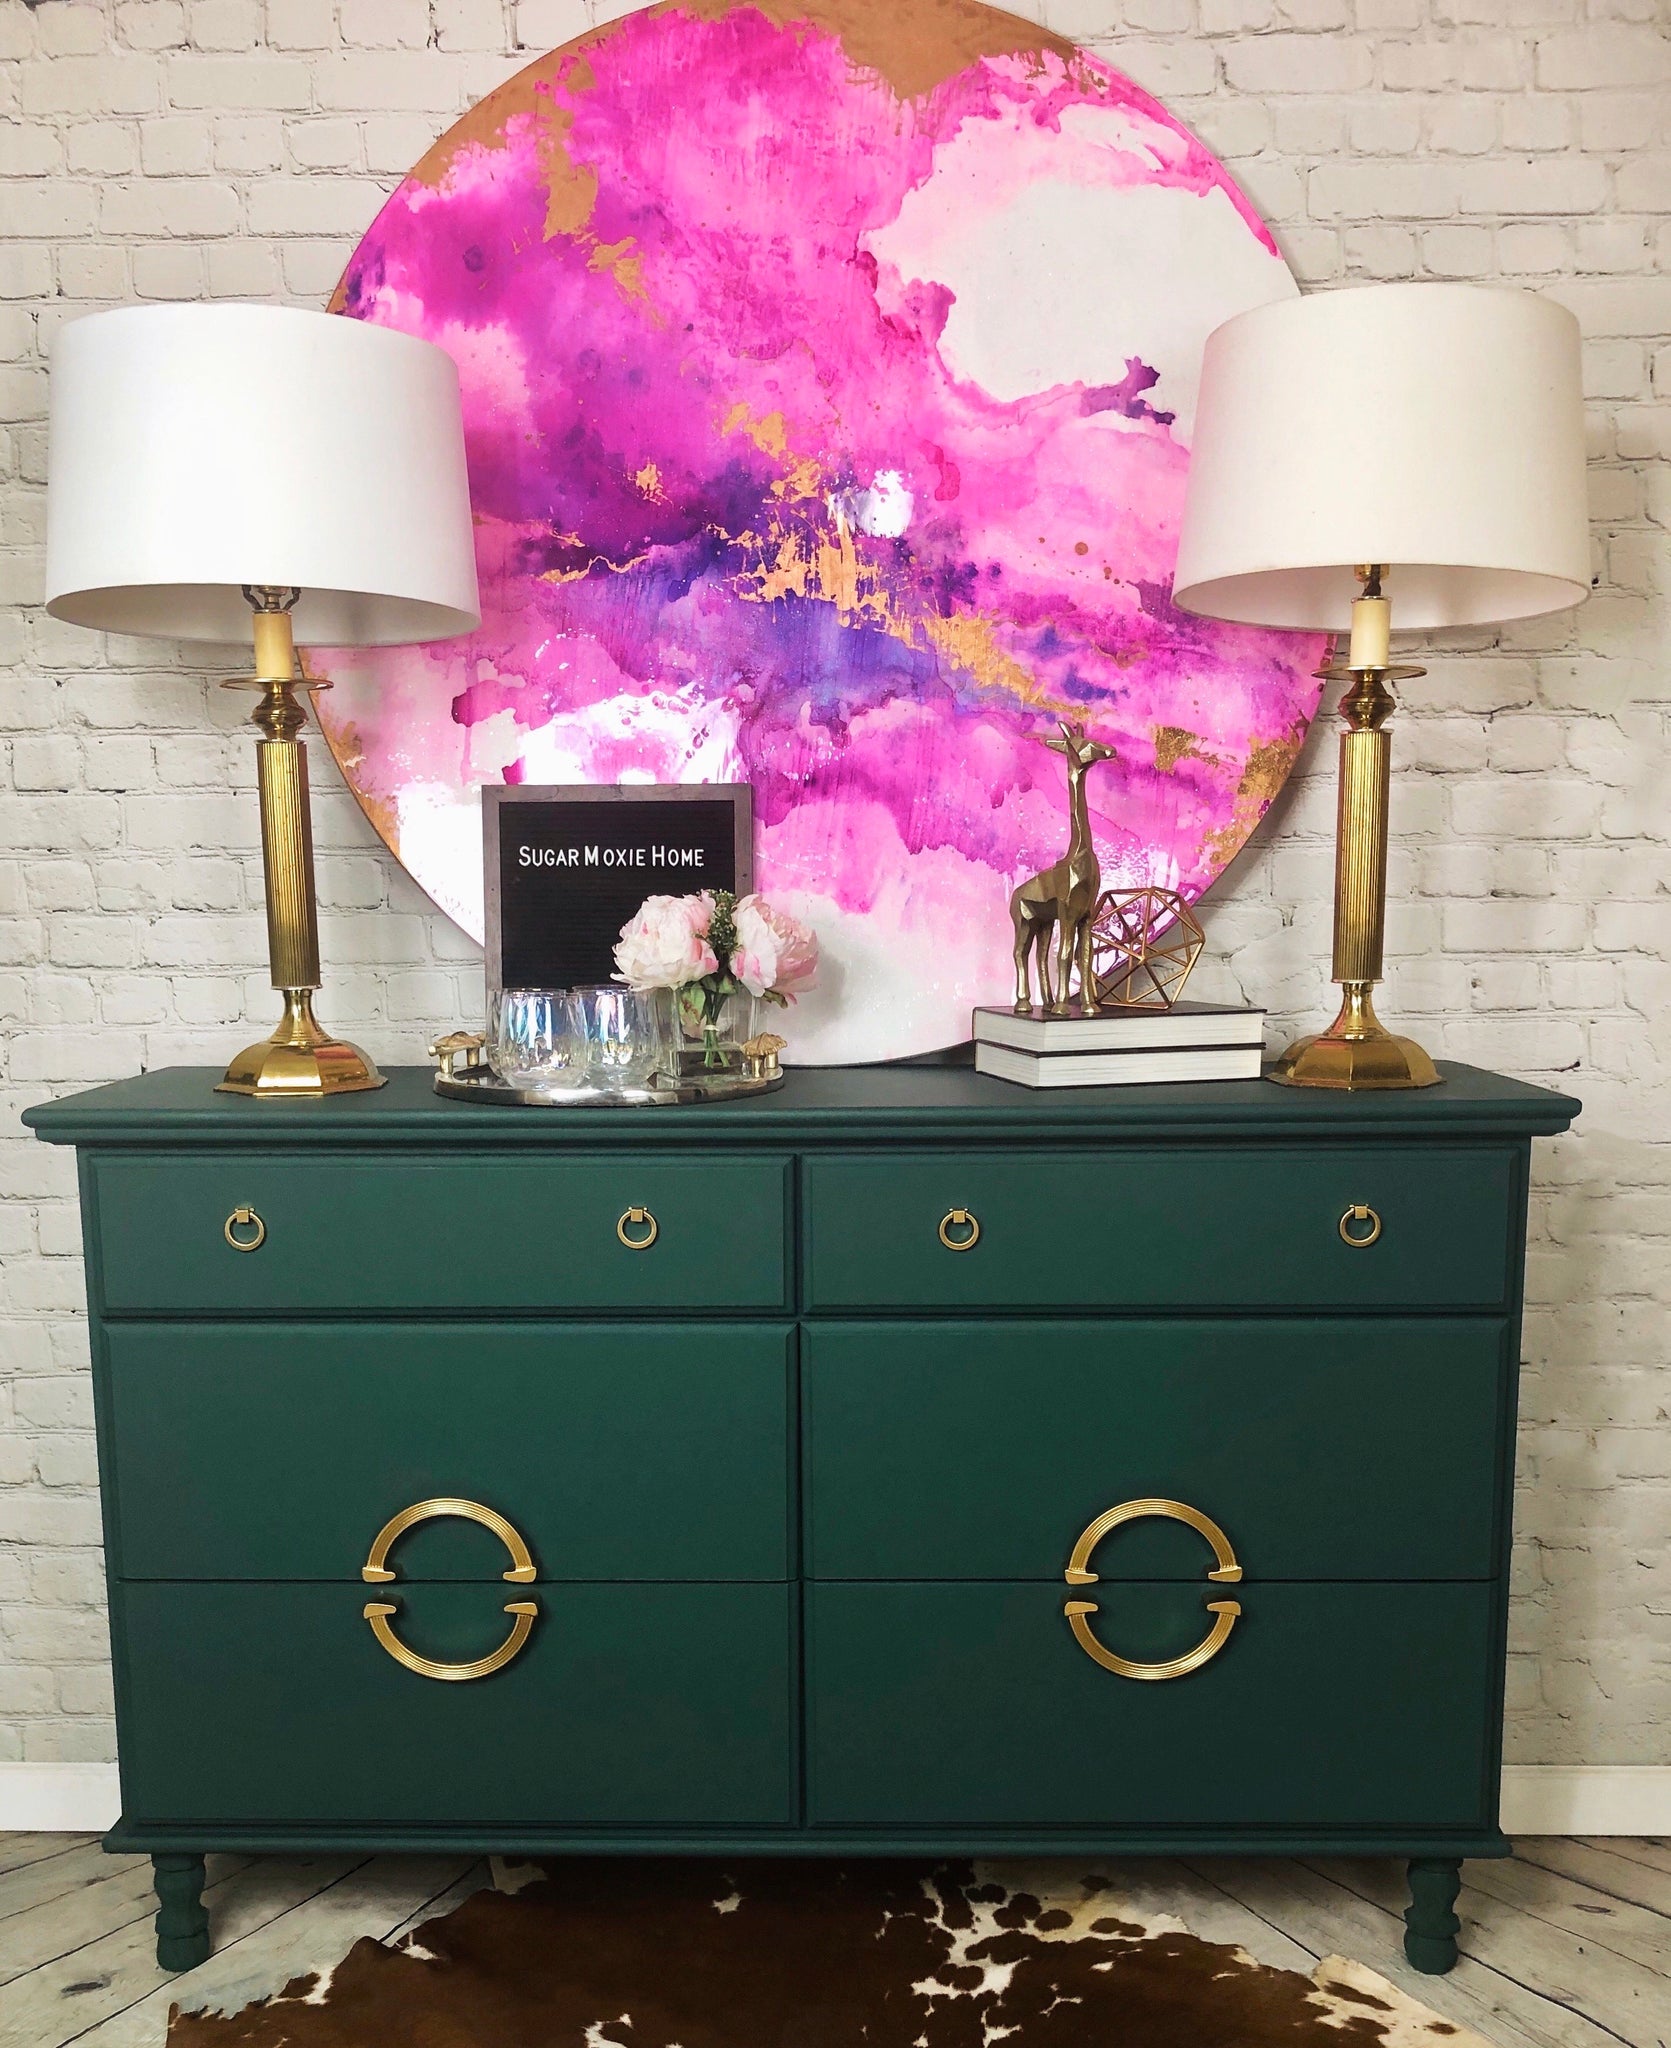 painted green furniture